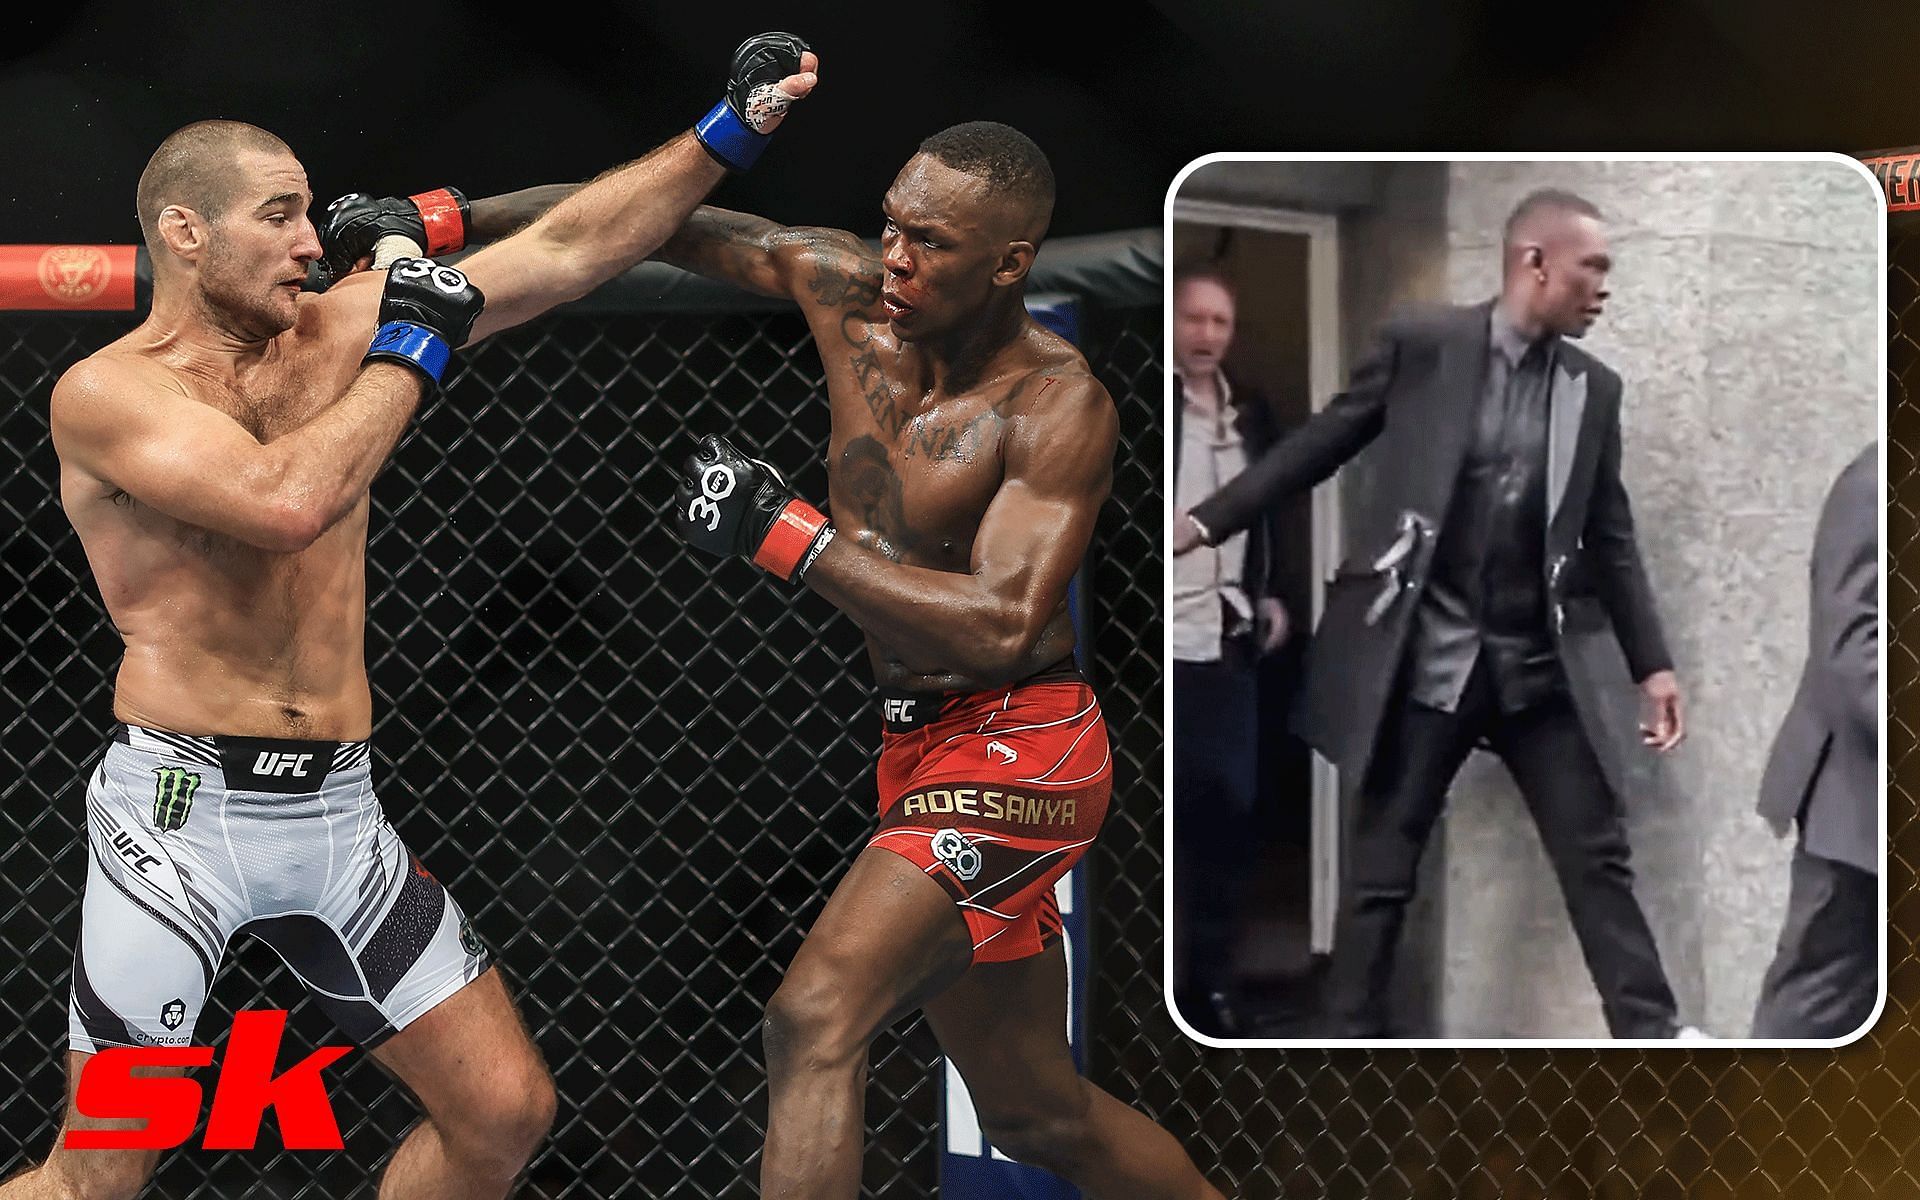 Sean Strickland vs. Israel Adesanya (Left); Adesanya at a courthouse in Auckland, New Zealand (Right) [*Image courtesy: Getty Images; @MMAFayce Twitter]